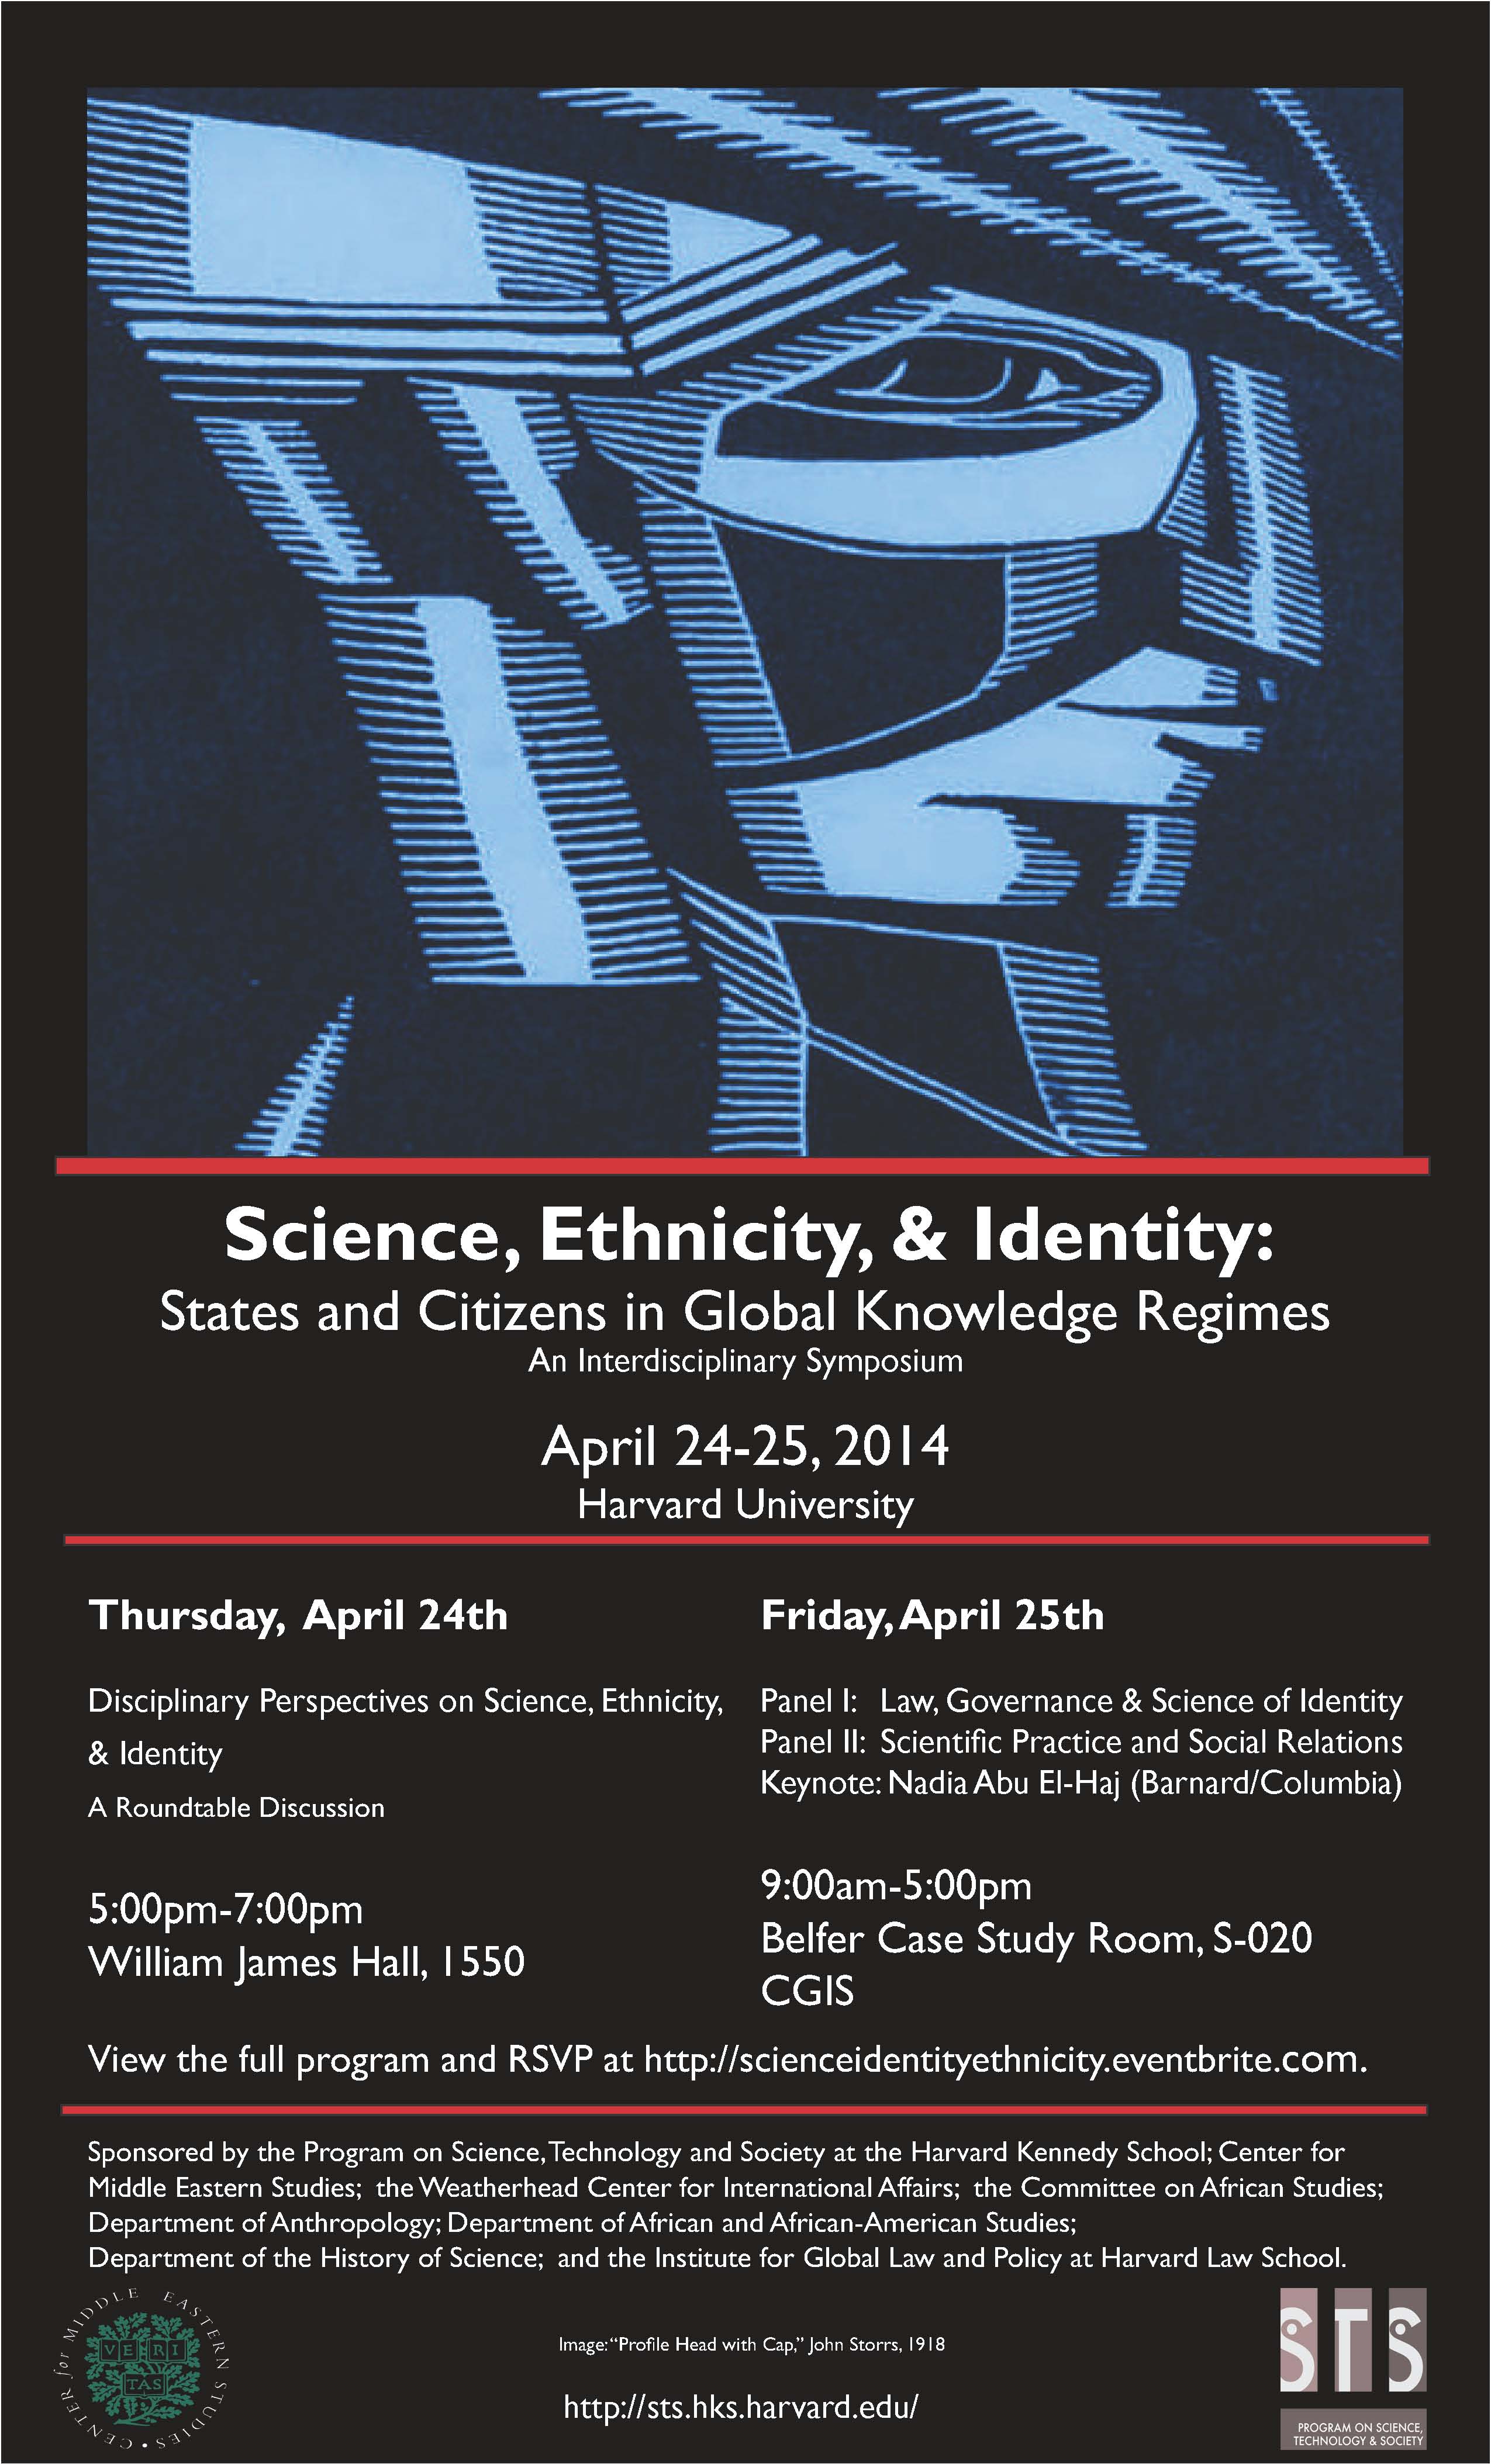 Science, Ethnicity, and Identity poster